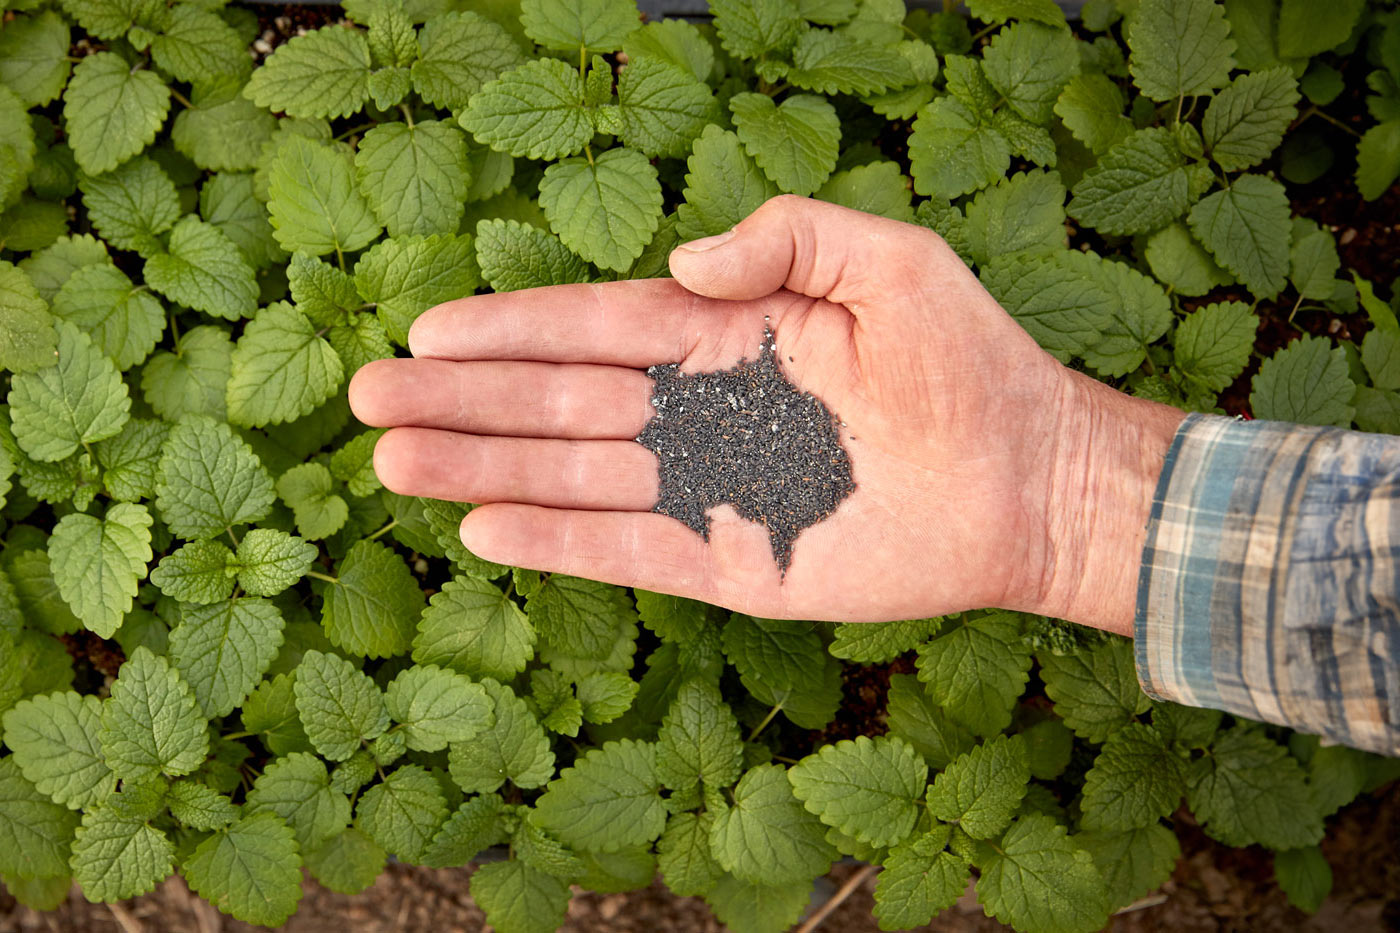 Hand with mint leaves and seeds in their palm